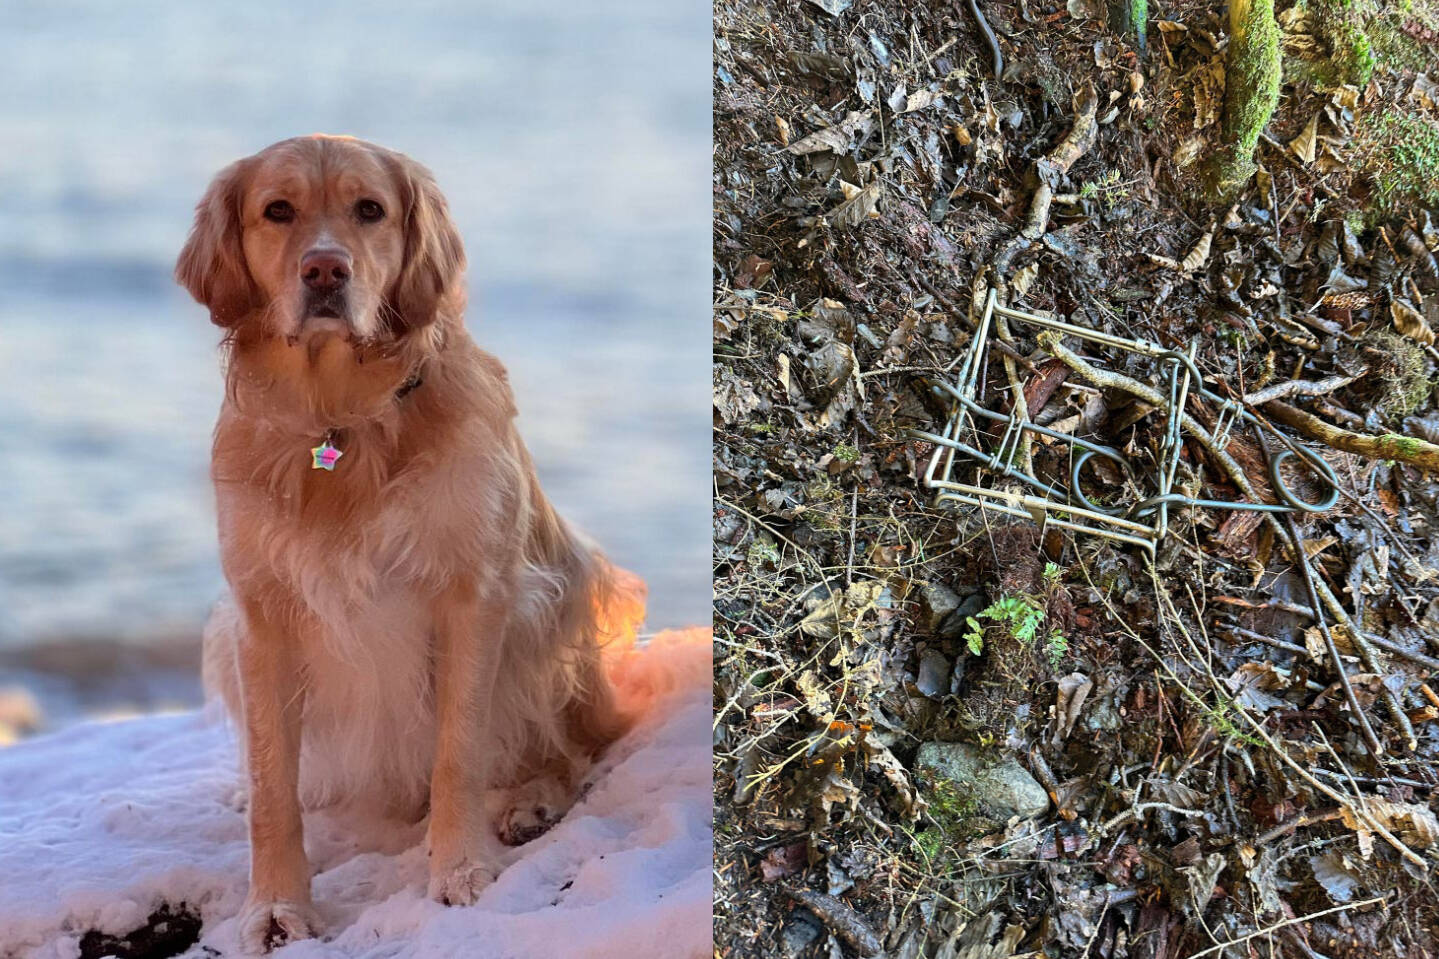 These photos show Nova, a 3-year-old golden retriever, and the illegally placed body hold trap, commonly referred to as a Conibear trap, that caught her while walking near Outer Point Trail last week. (Courtesy / Jessica Davis)